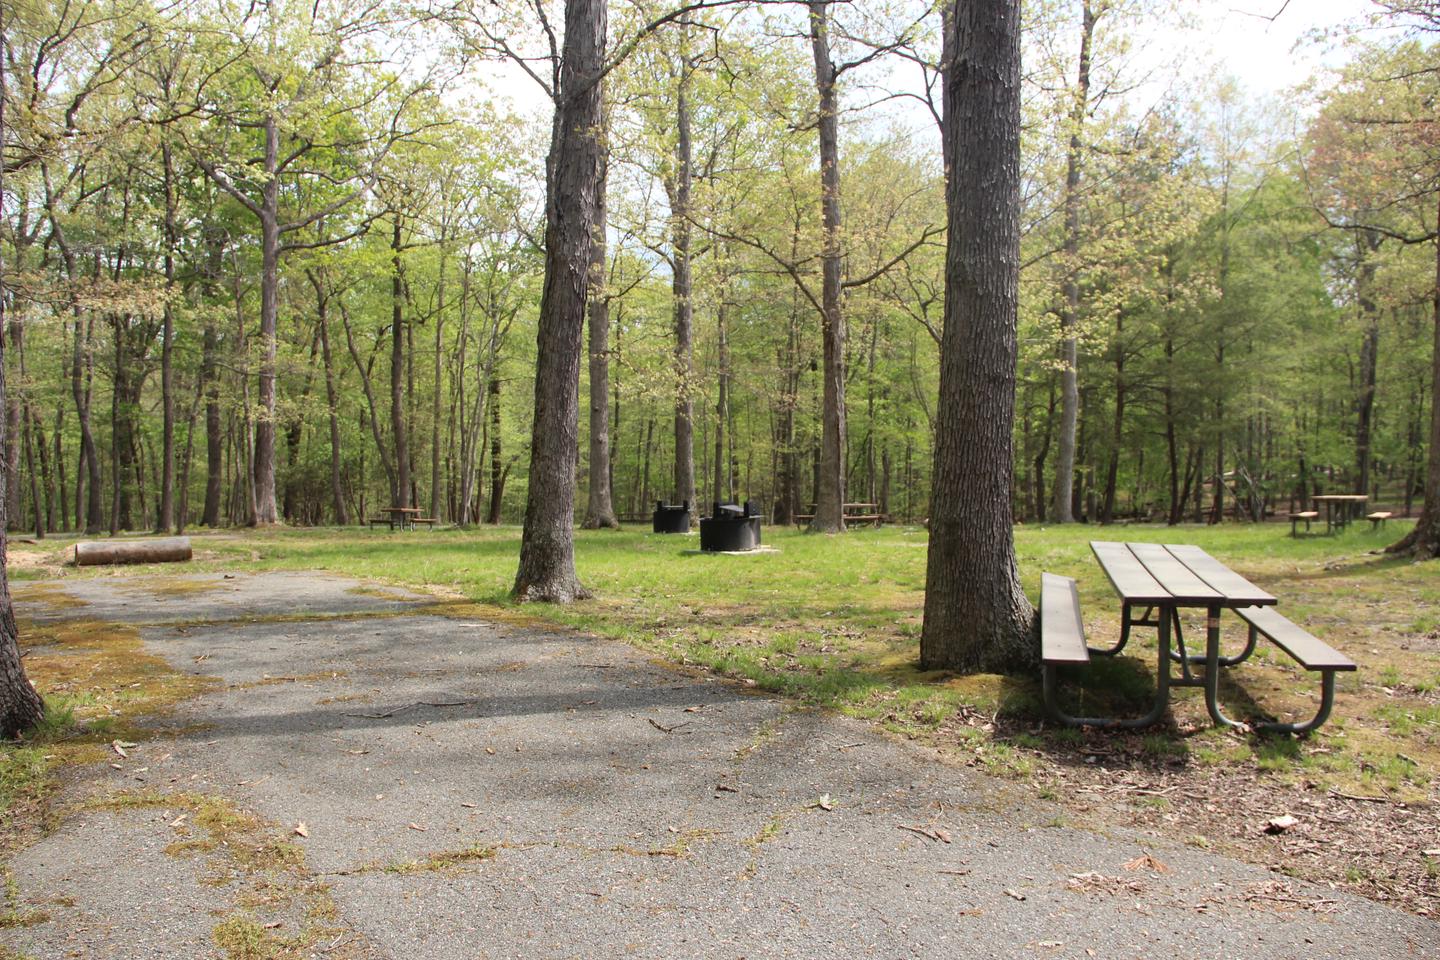 C104 C Loop of the Greenbelt Park Maryland campground